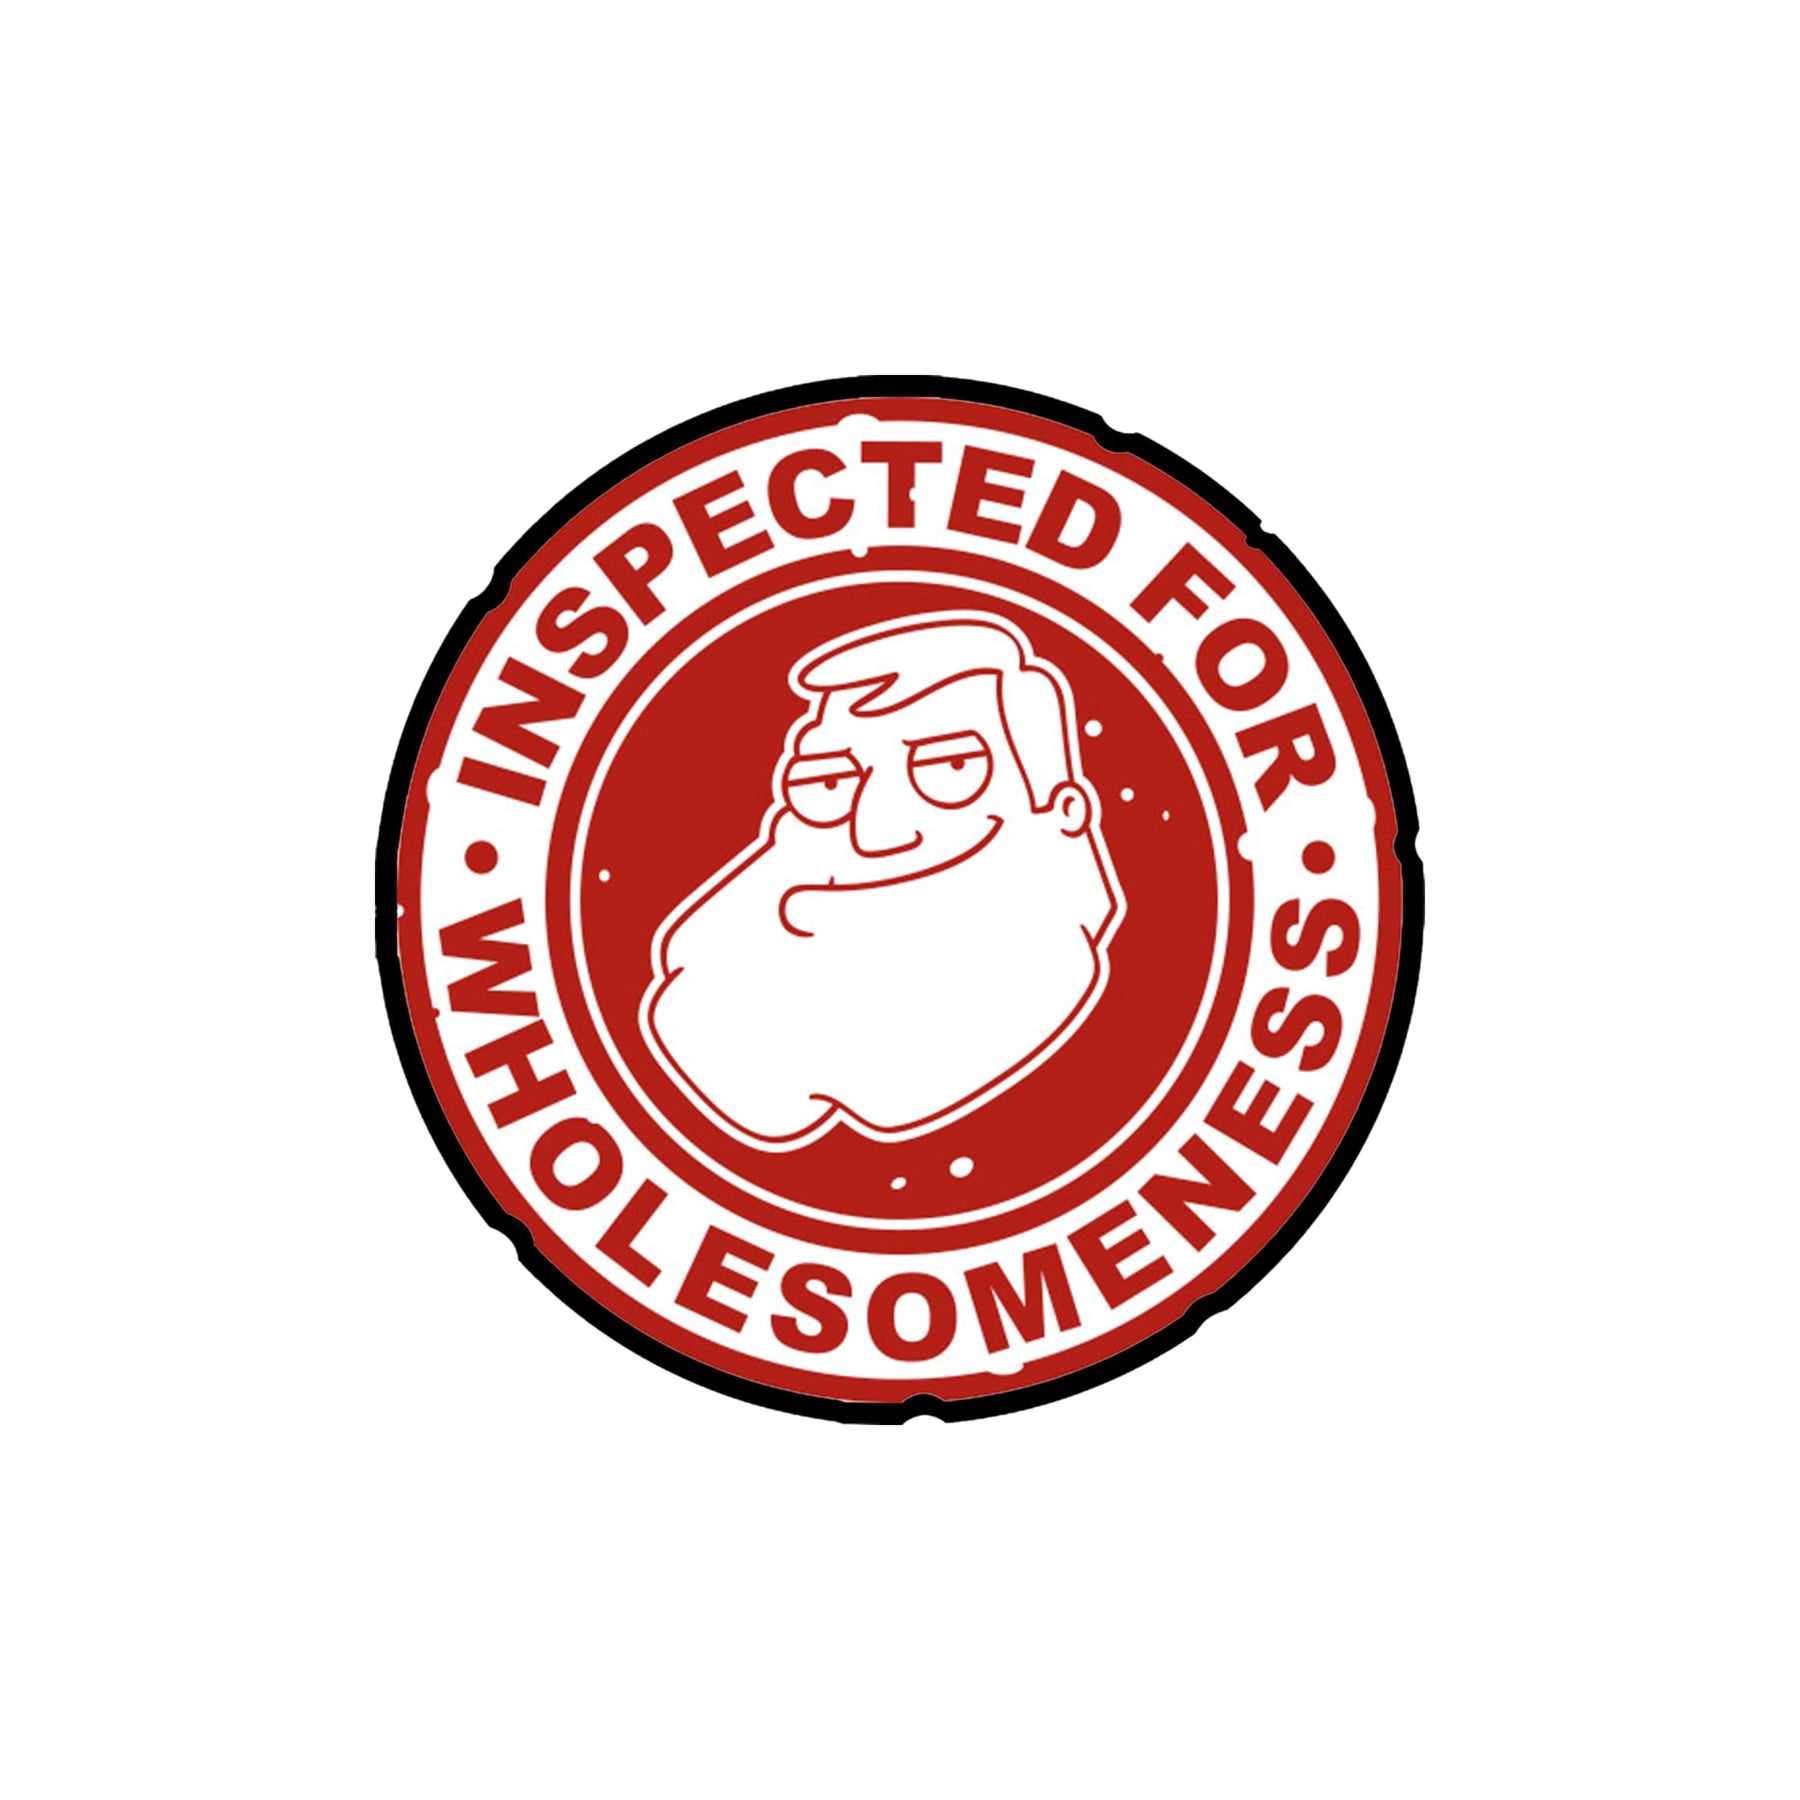 American Dad! "Inspected For Wholesomeness" Enamel Pin | SDCC 2023 Exclusive